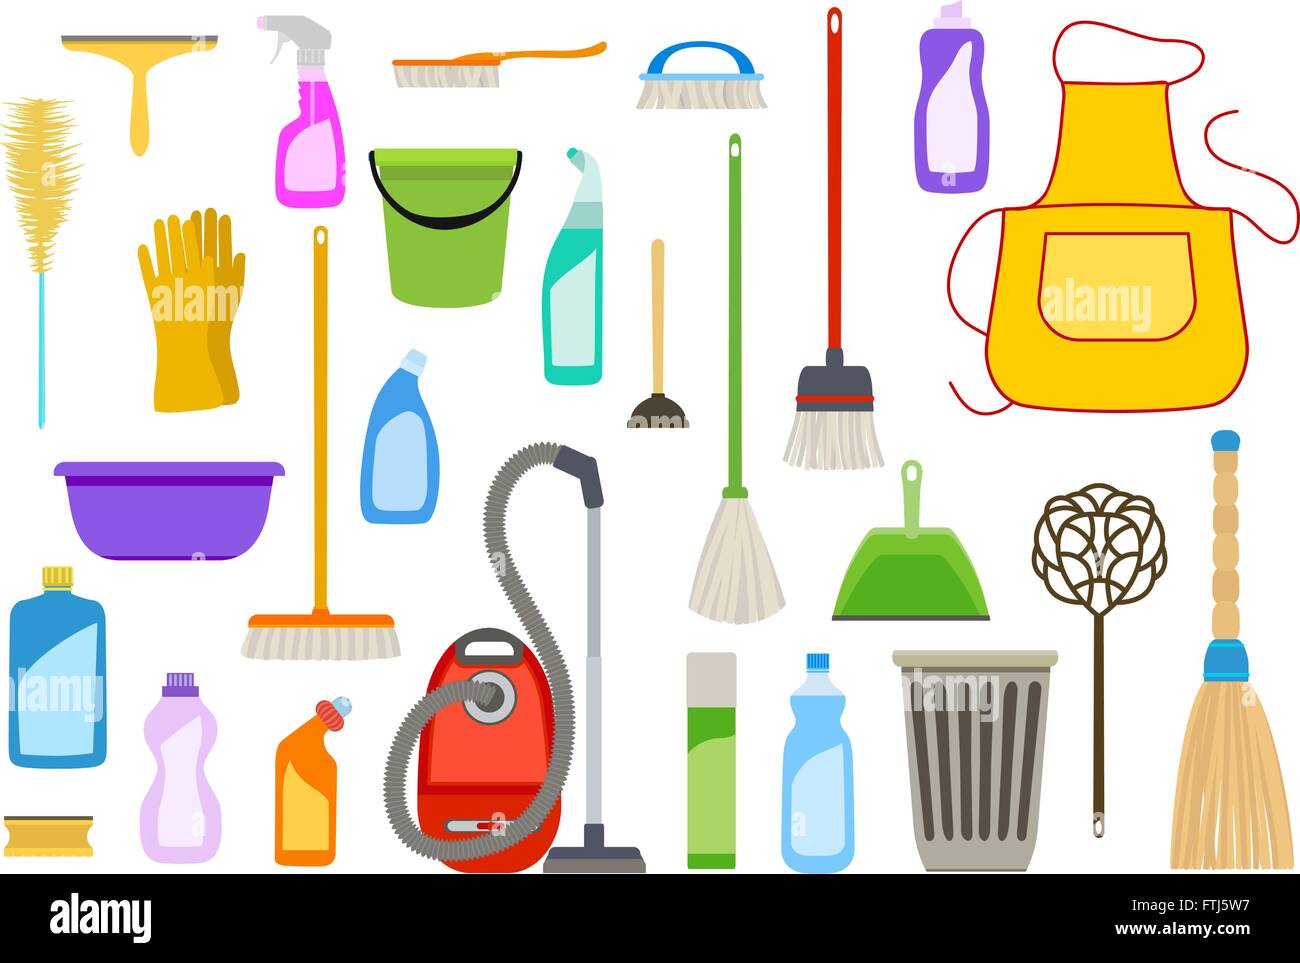 https://c8.alamy.com/comp/FTJ5W7/set-of-cleaning-supplies-tools-of-housecleaning-on-white-vector-FTJ5W7.jpg